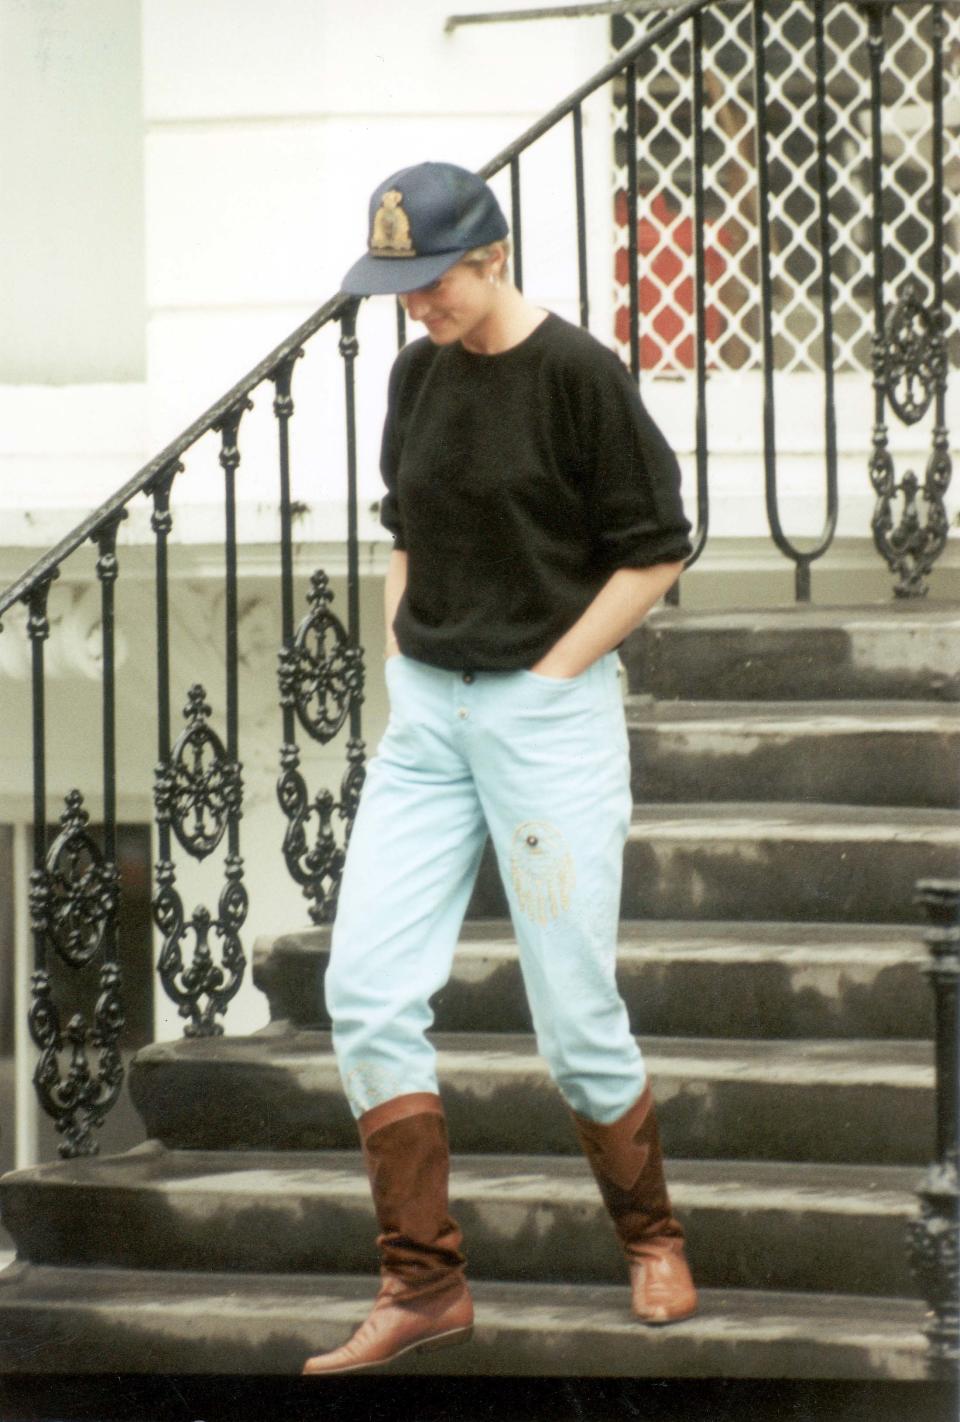 Mandatory Credit: Photo by Alex Lentati/Evening Standard/Shutterstock (1132924a)Princess DianaA Smiling Diana Princess Of Wales Pictured After Dropping Prince Harry Off At School She Is Wearing Cowboy Boots And A Baseball Cap.